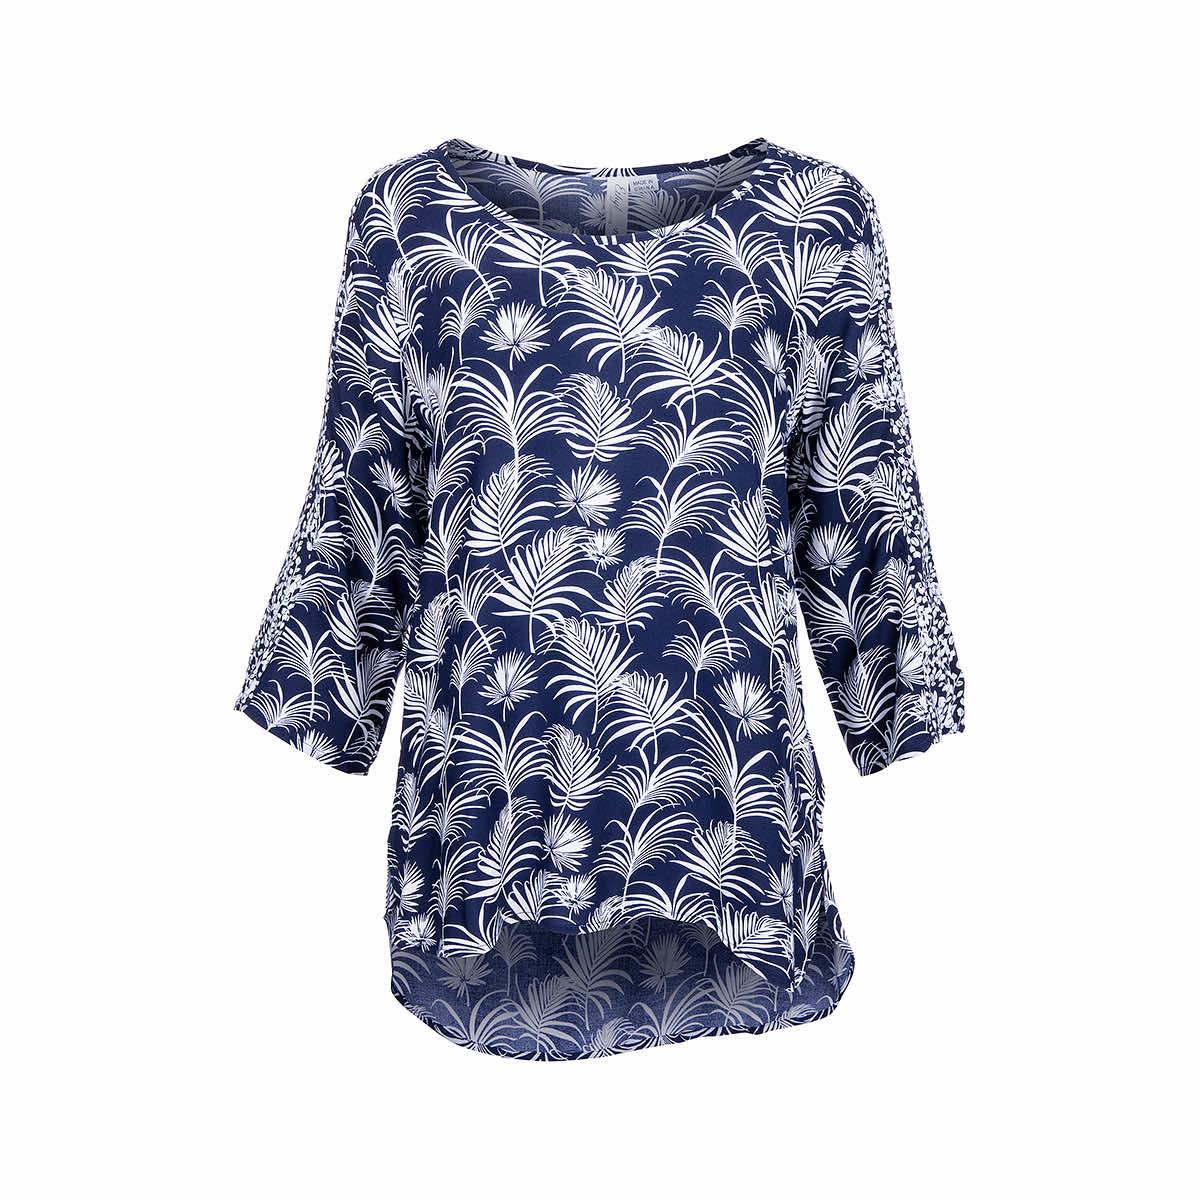  Women's Palms Woven Elbow Length Sleeves Top